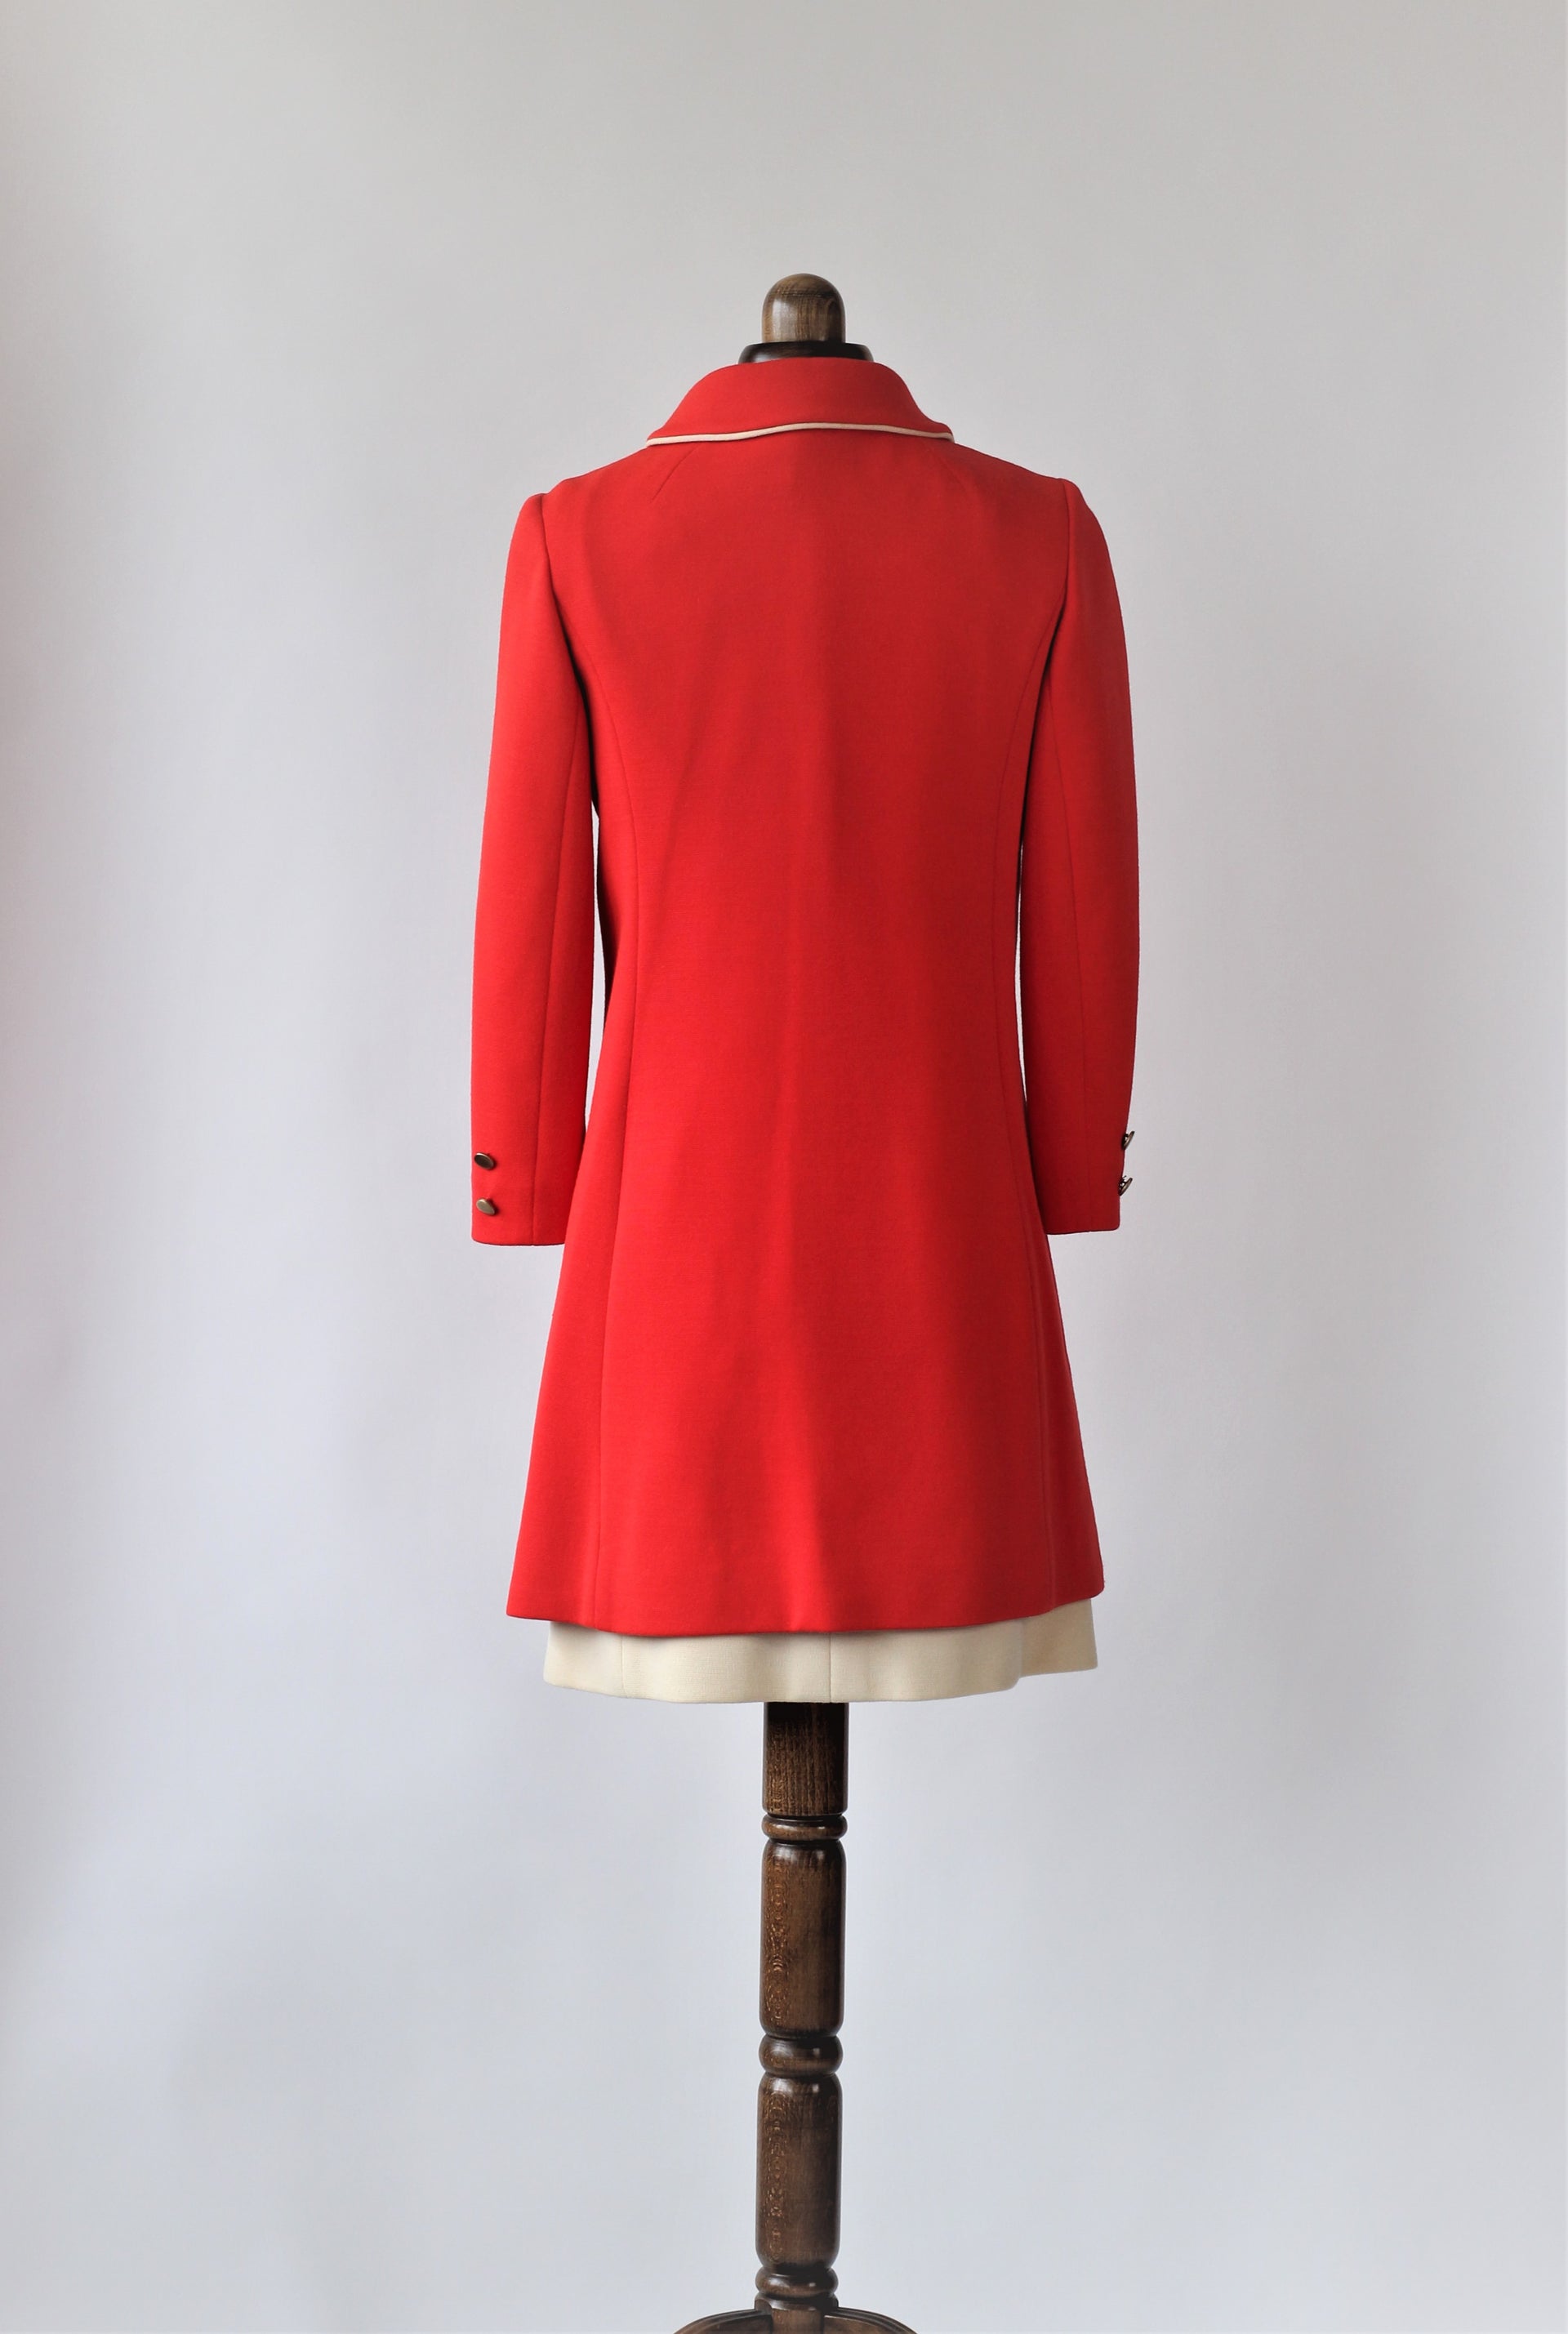 1960s French Design Wool Dress Suit// Size S/M